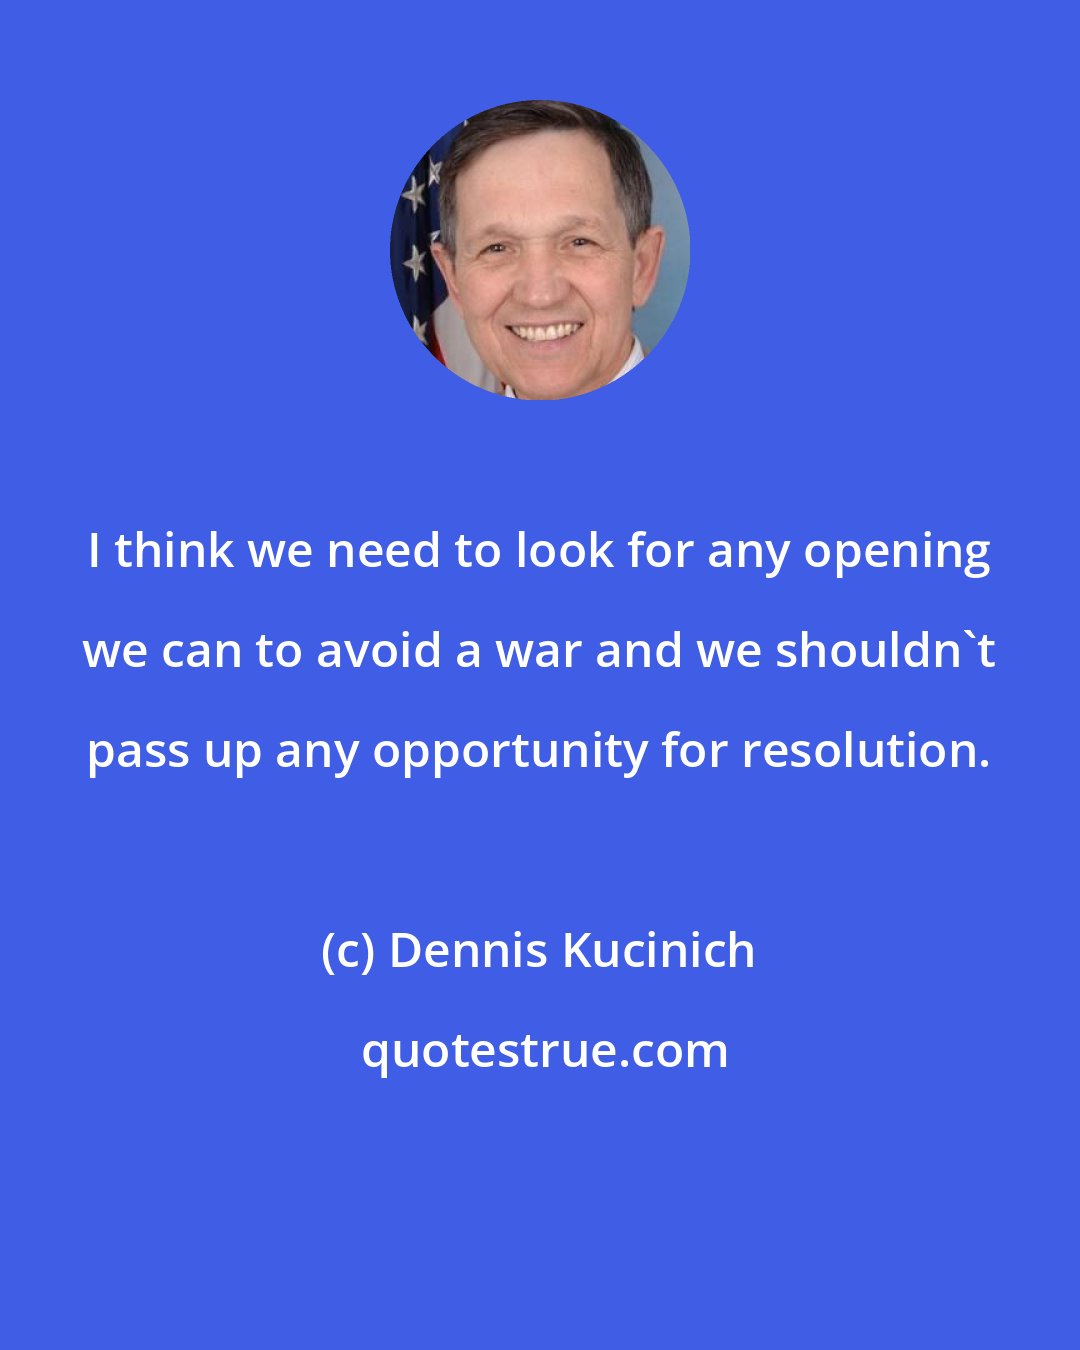 Dennis Kucinich: I think we need to look for any opening we can to avoid a war and we shouldn't pass up any opportunity for resolution.